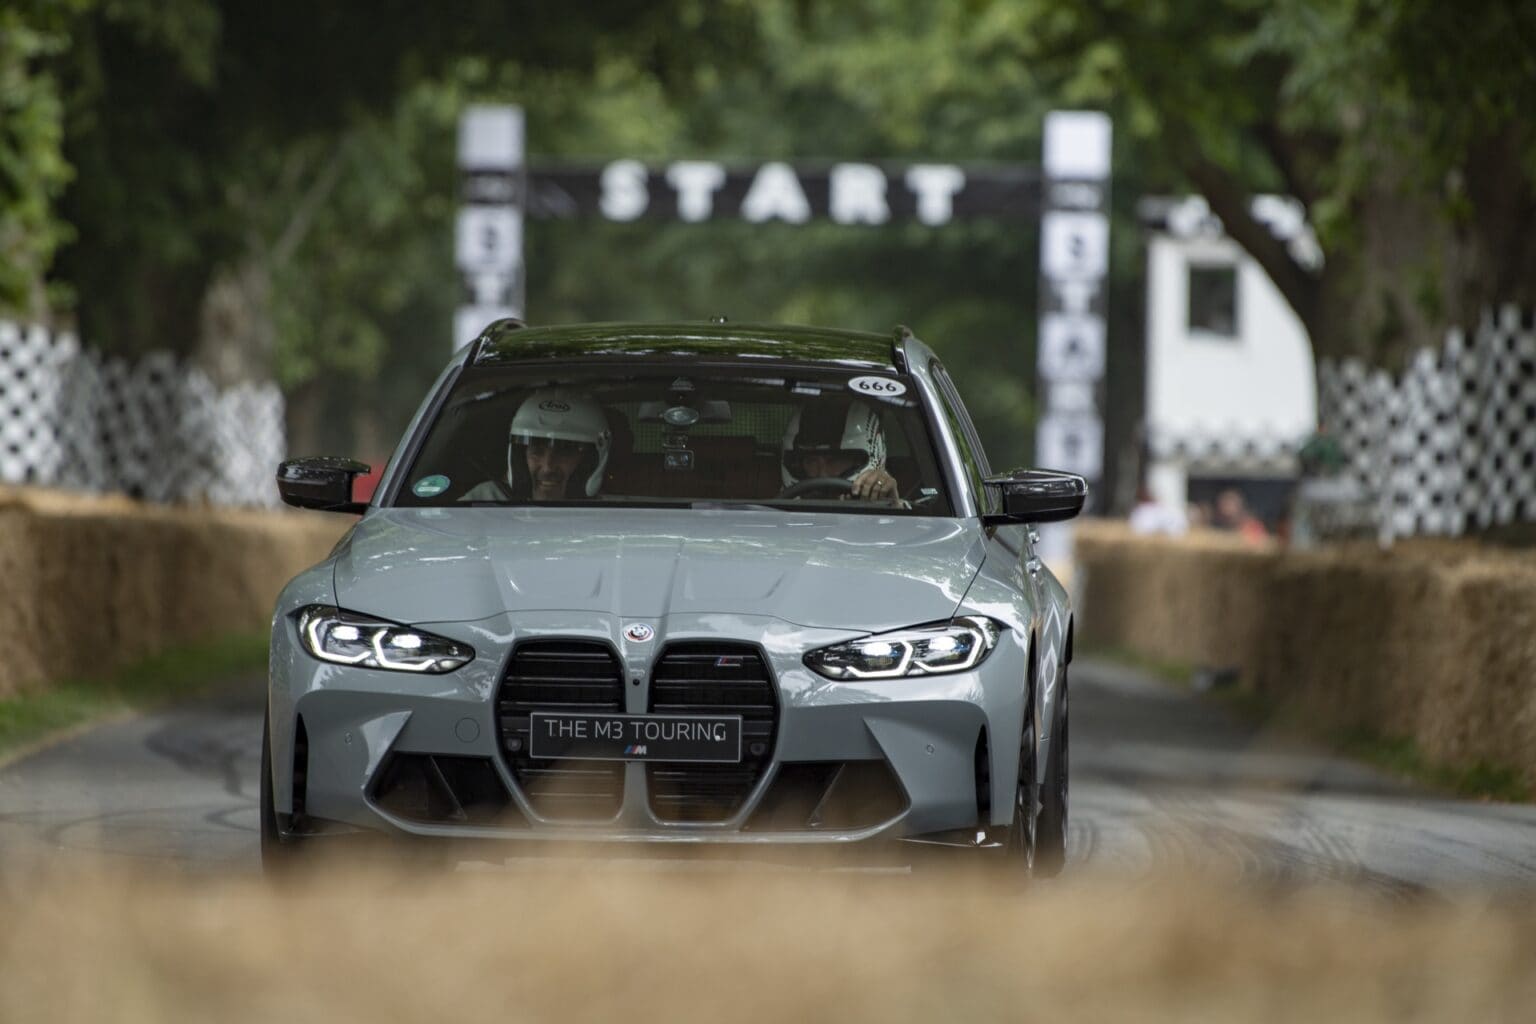 bmw m3 touring goodwood festival of speed 04 1536x1024